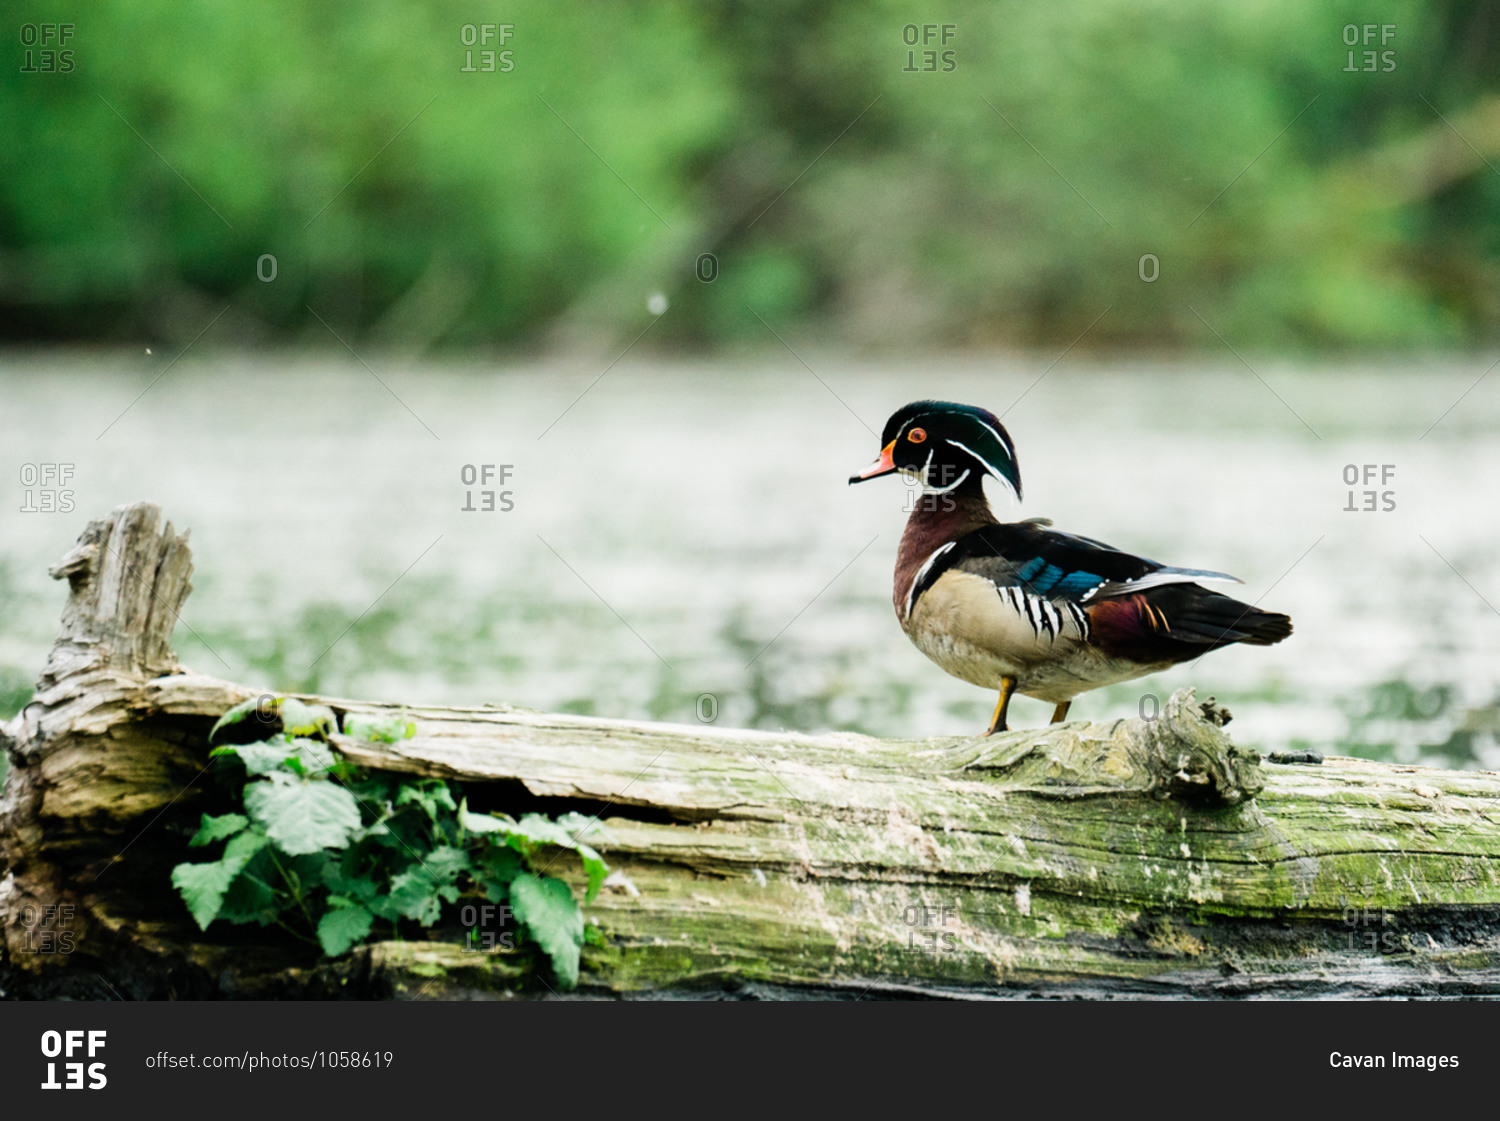 Closeup up portrait of a male wood duck standing on a log